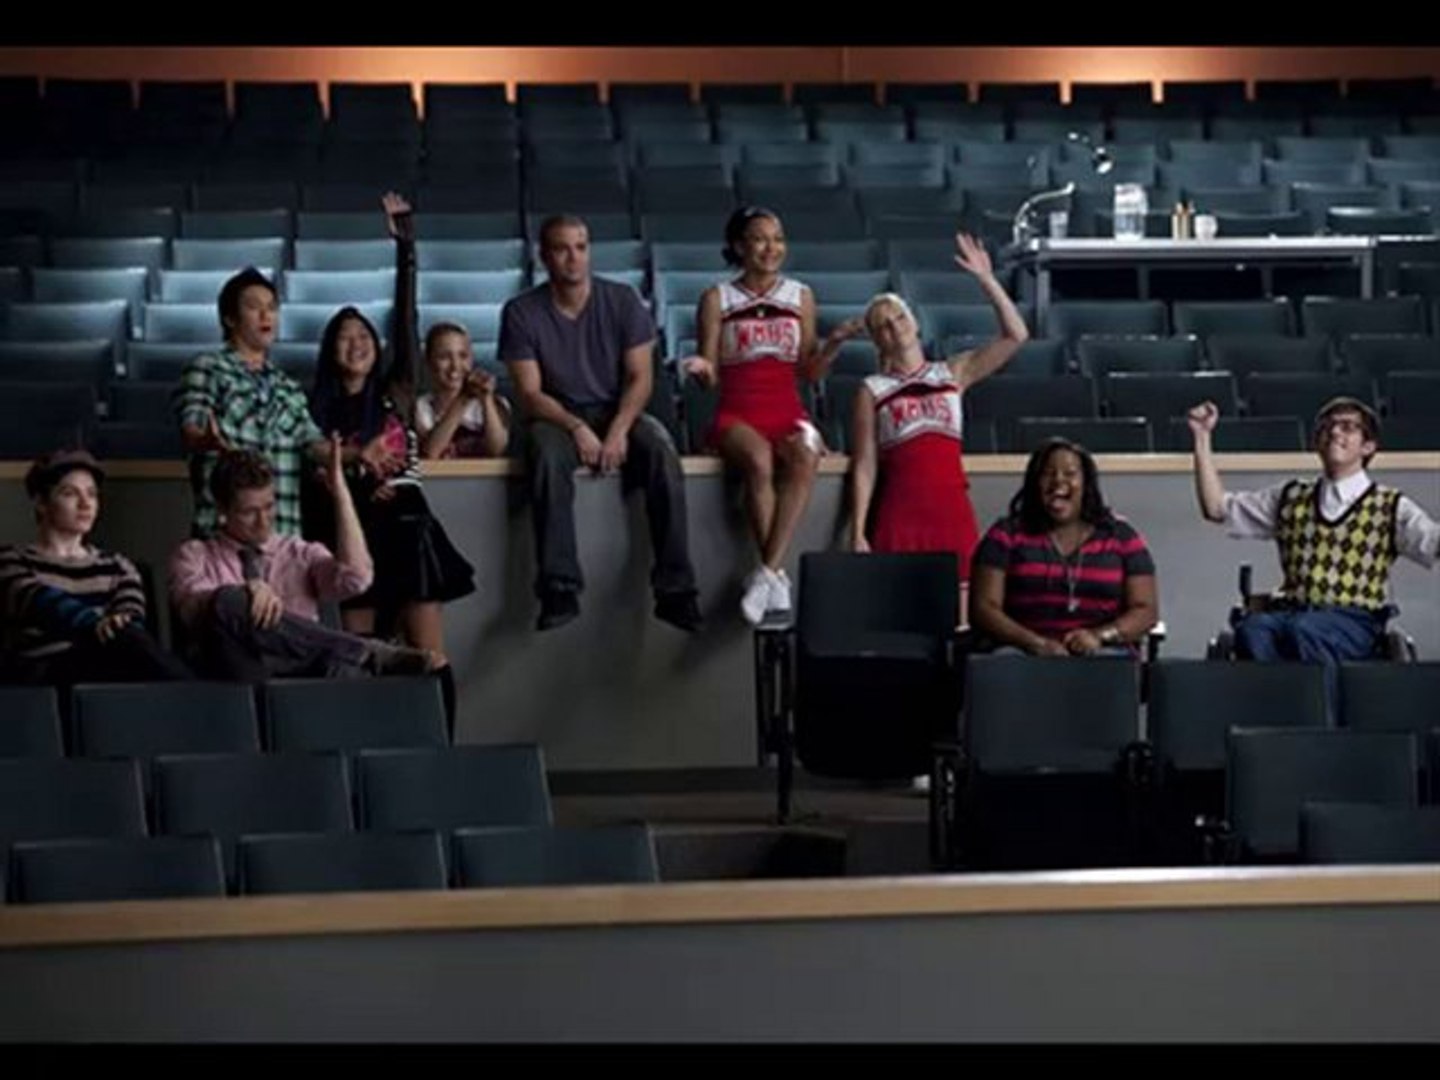 Glee Season 2 Episode 1 Audition Part 1 - video Dailymotion